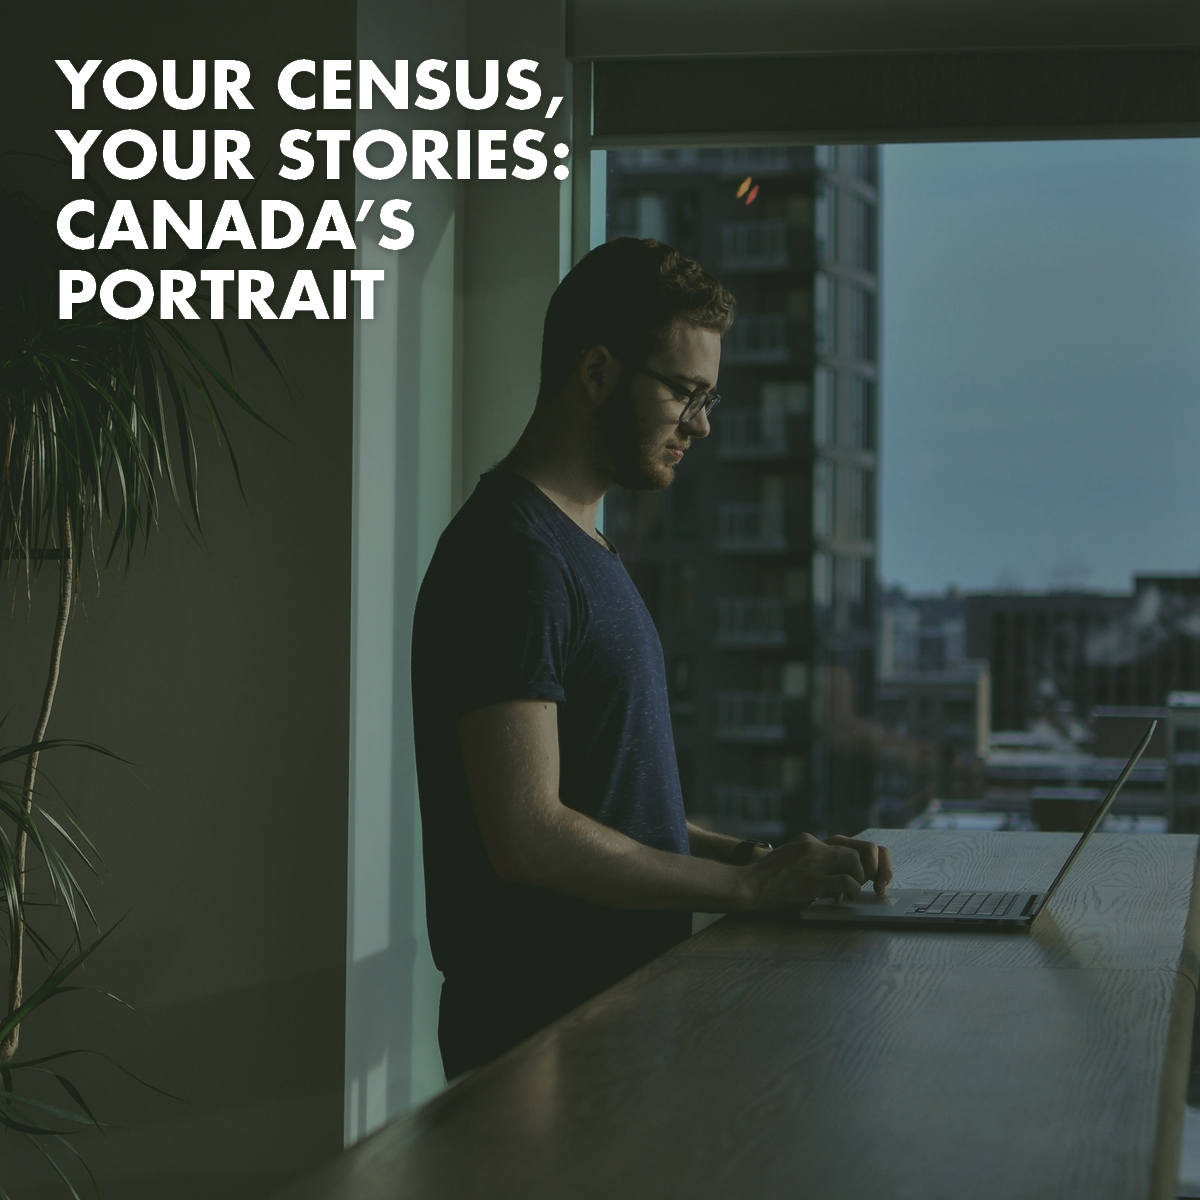 Man typing on a laptop Text overlay says "Your census, your stories: Canada's portrait"